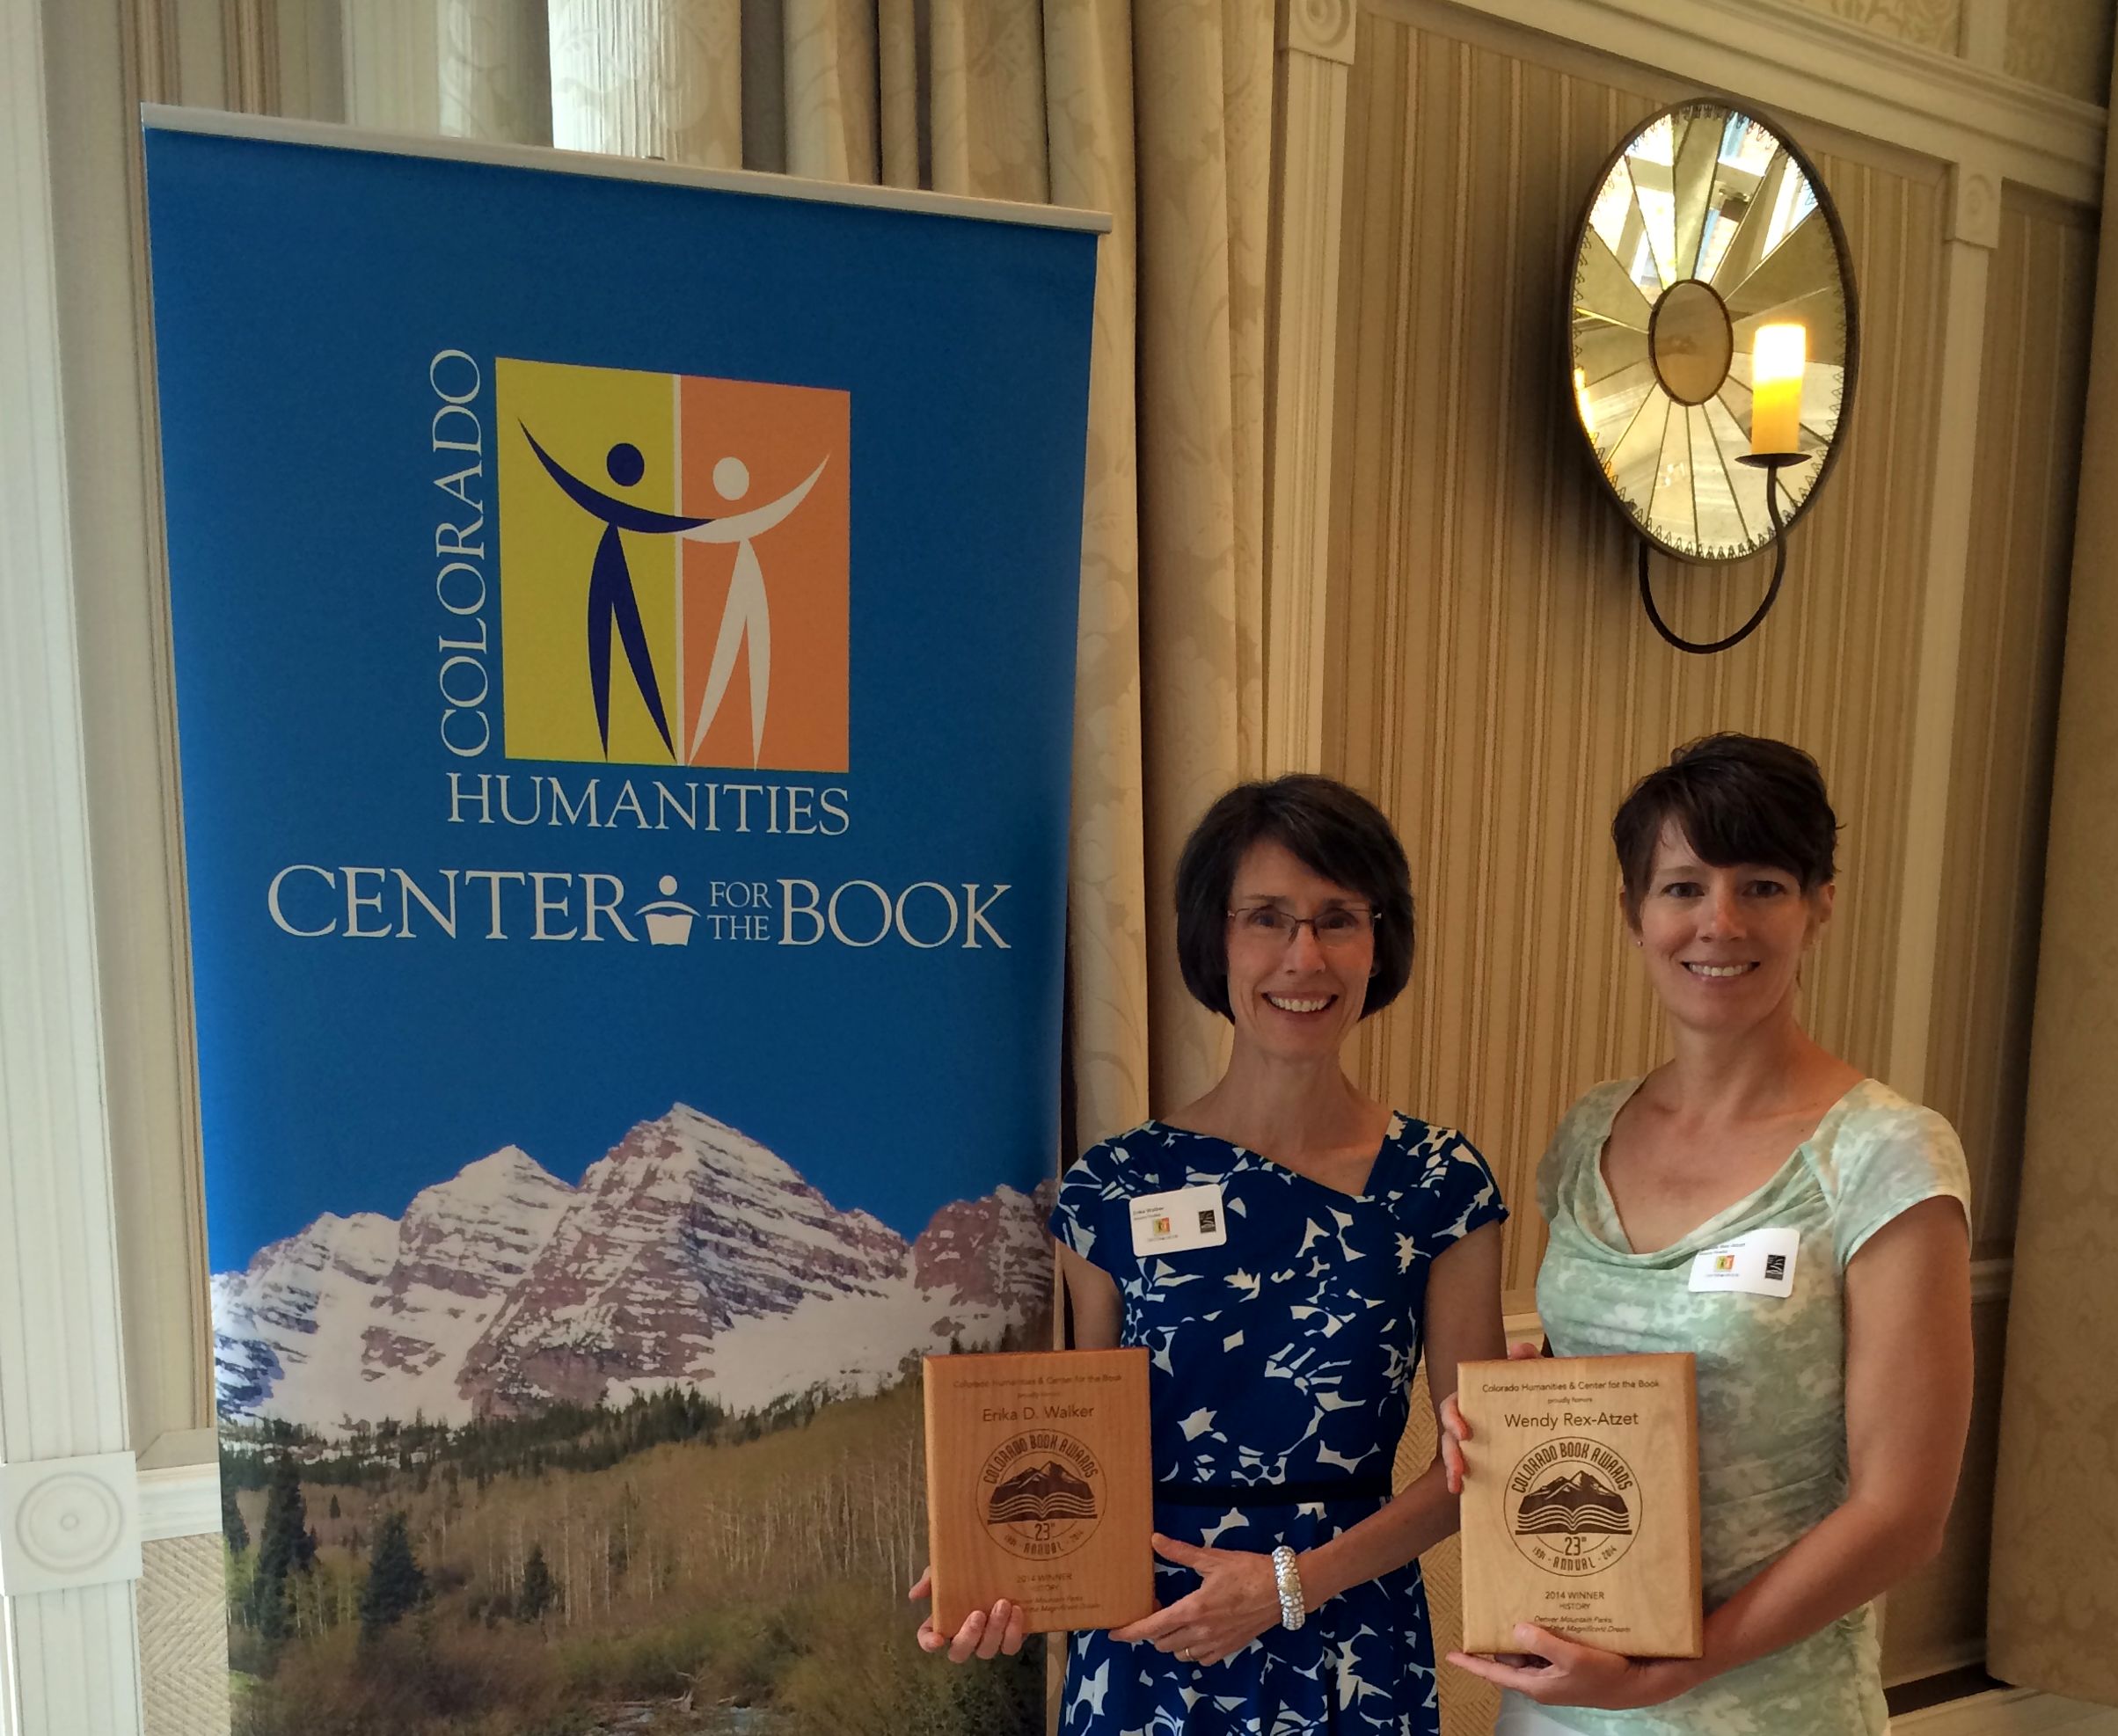 Erika Walker, left, and Wendy Rex-Atzet accepted our award at the Hotel Jerome in Aspen June 13th. 